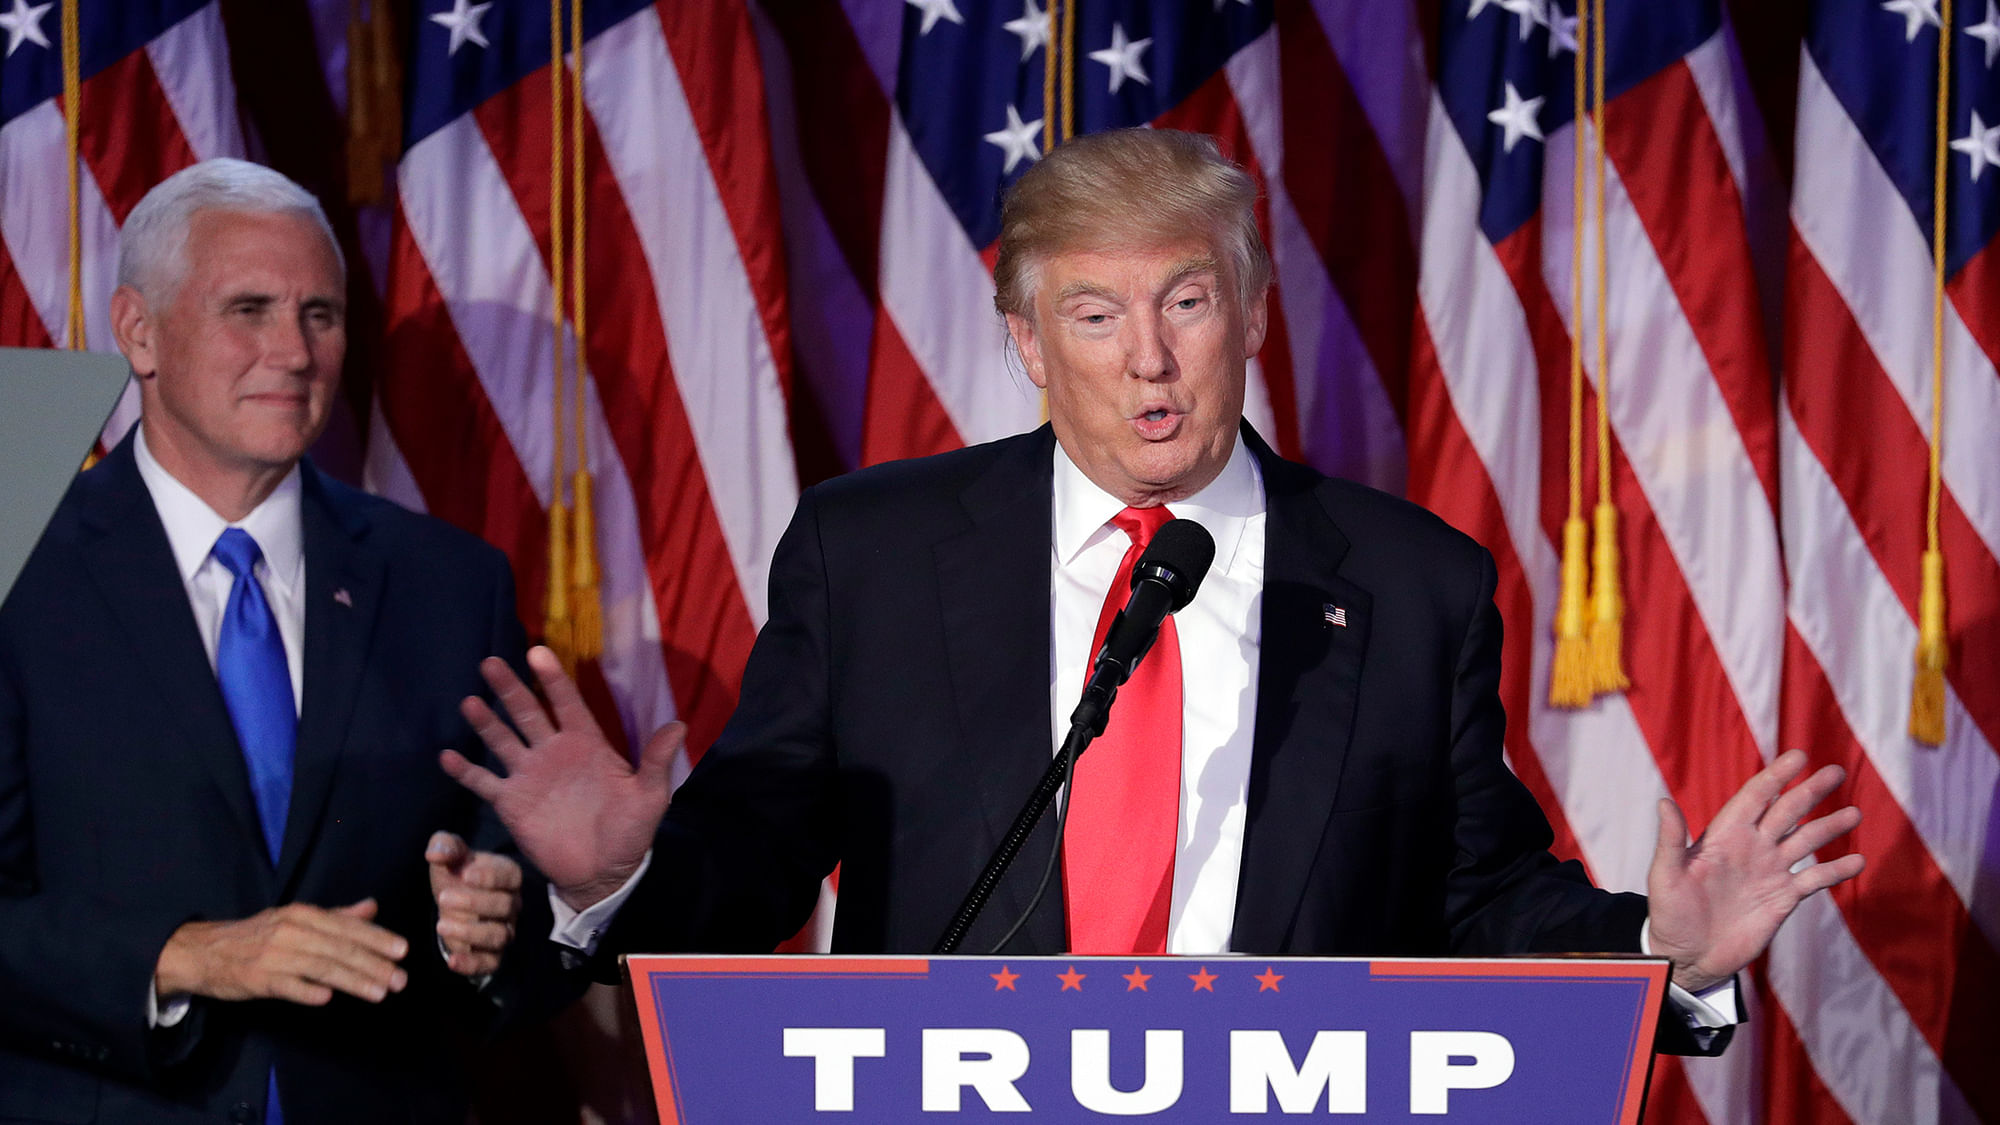 Donald Trump delivers his victory speech in New York on Tuesday. (Photo Credit: AP)